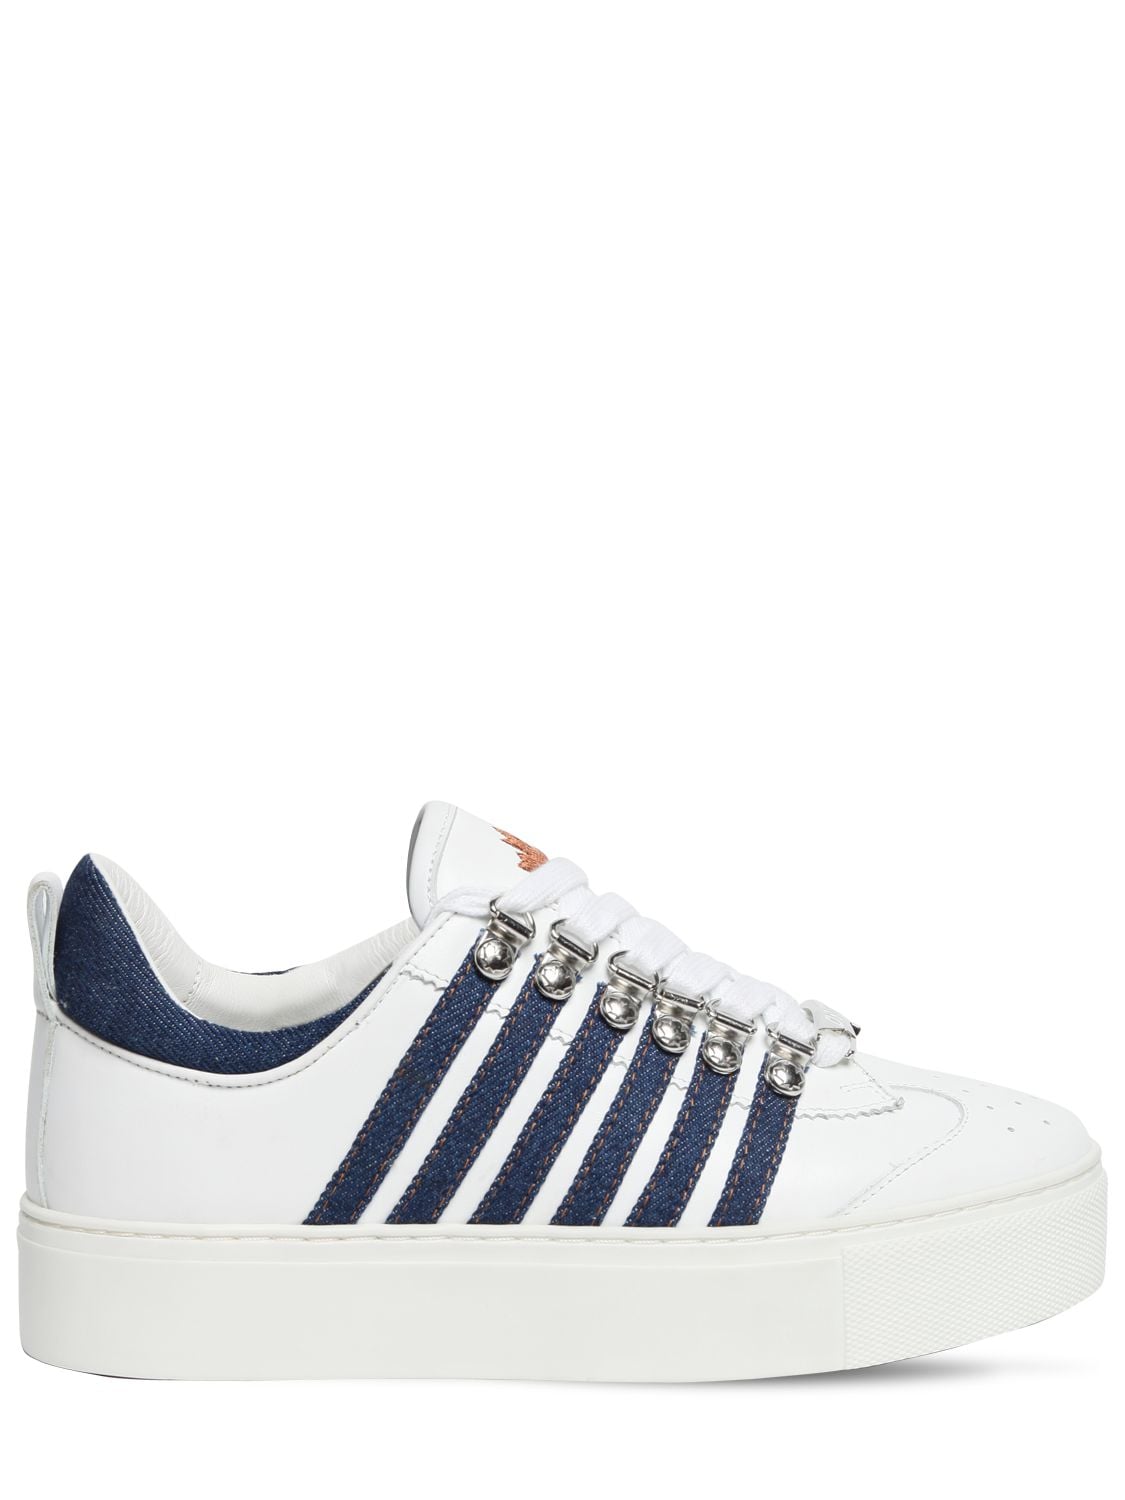 Dsquared2 30MM 251 LEATHER SNEAKERS